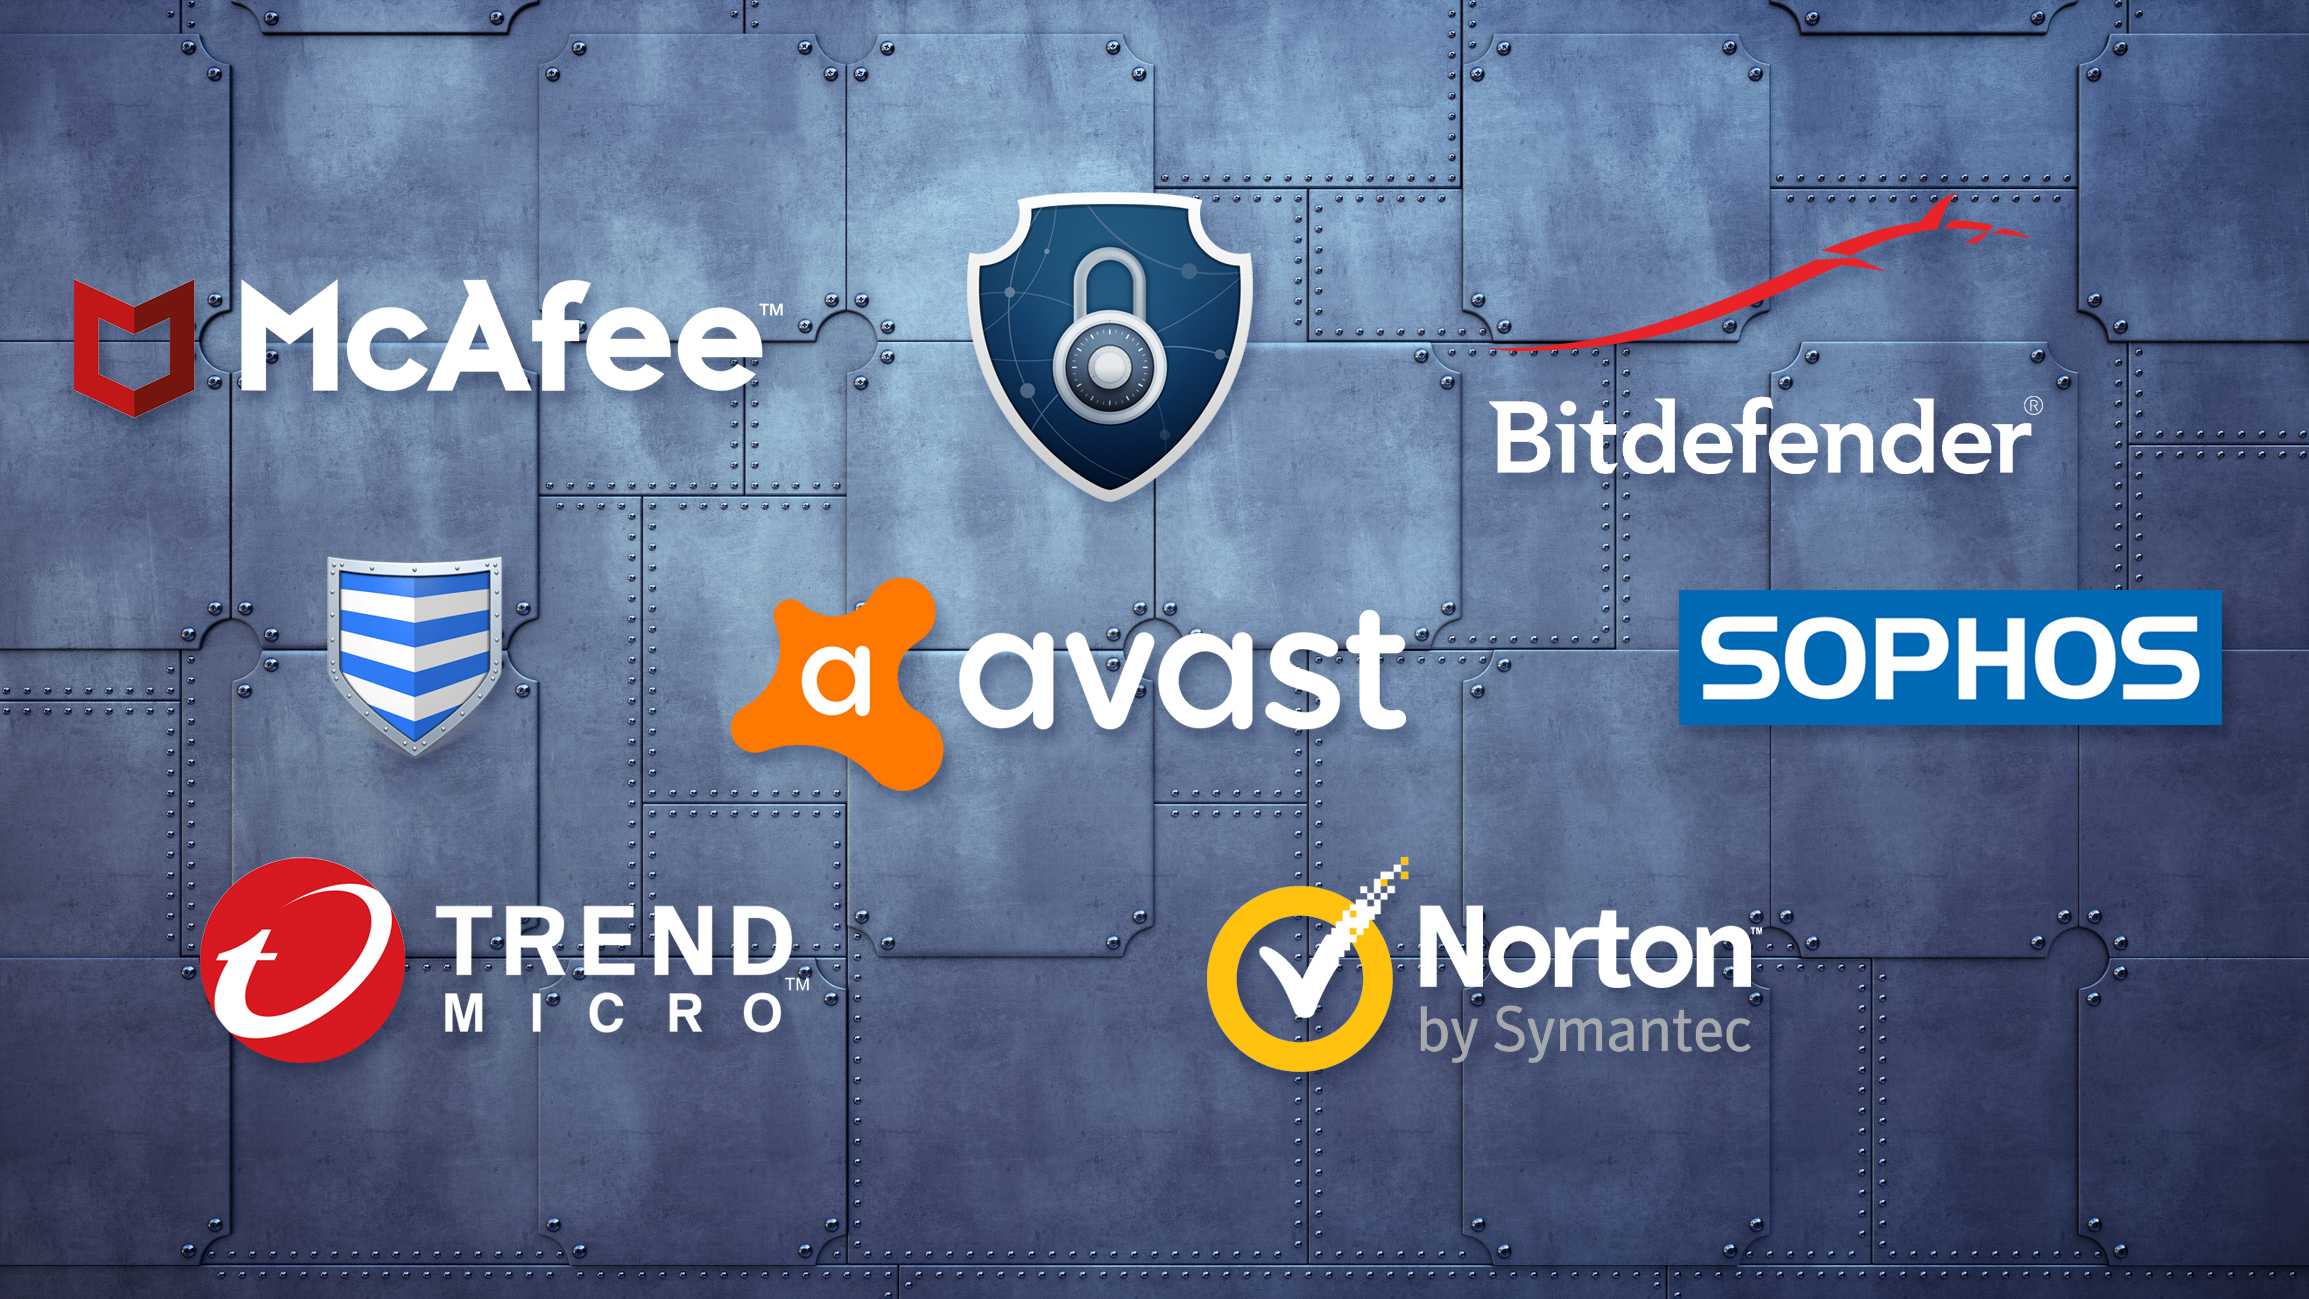 What Is The Best Internet Security And Antivirus For Android